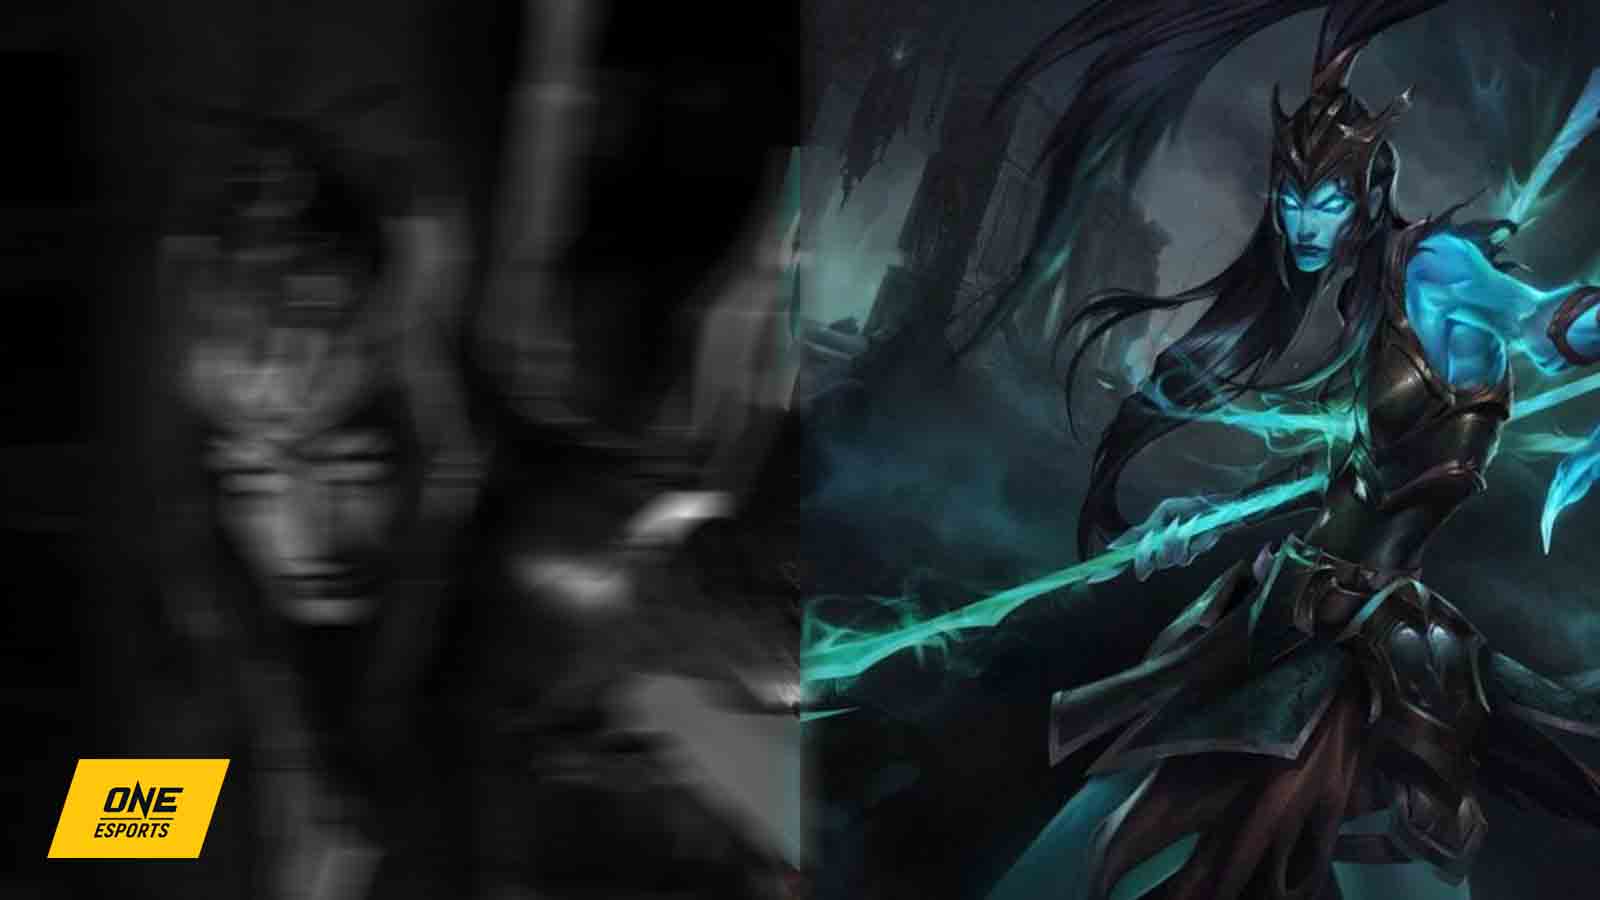 Super rare Kalista cosplay will render you speechless